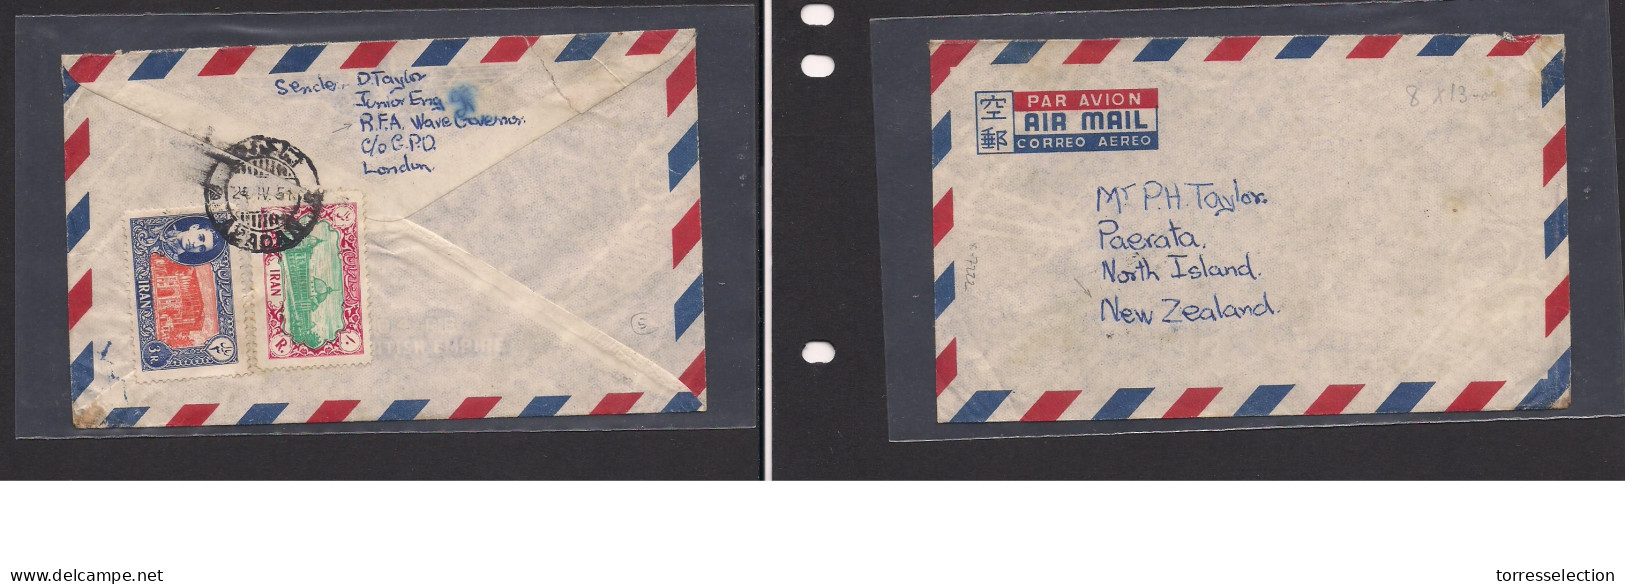 PERSIA. Persia Cover 1951 Reverse Mult Fkd Env Airmail To New Zealand RFA Organization Abadan. Easy Deal. XSALE. - Irán